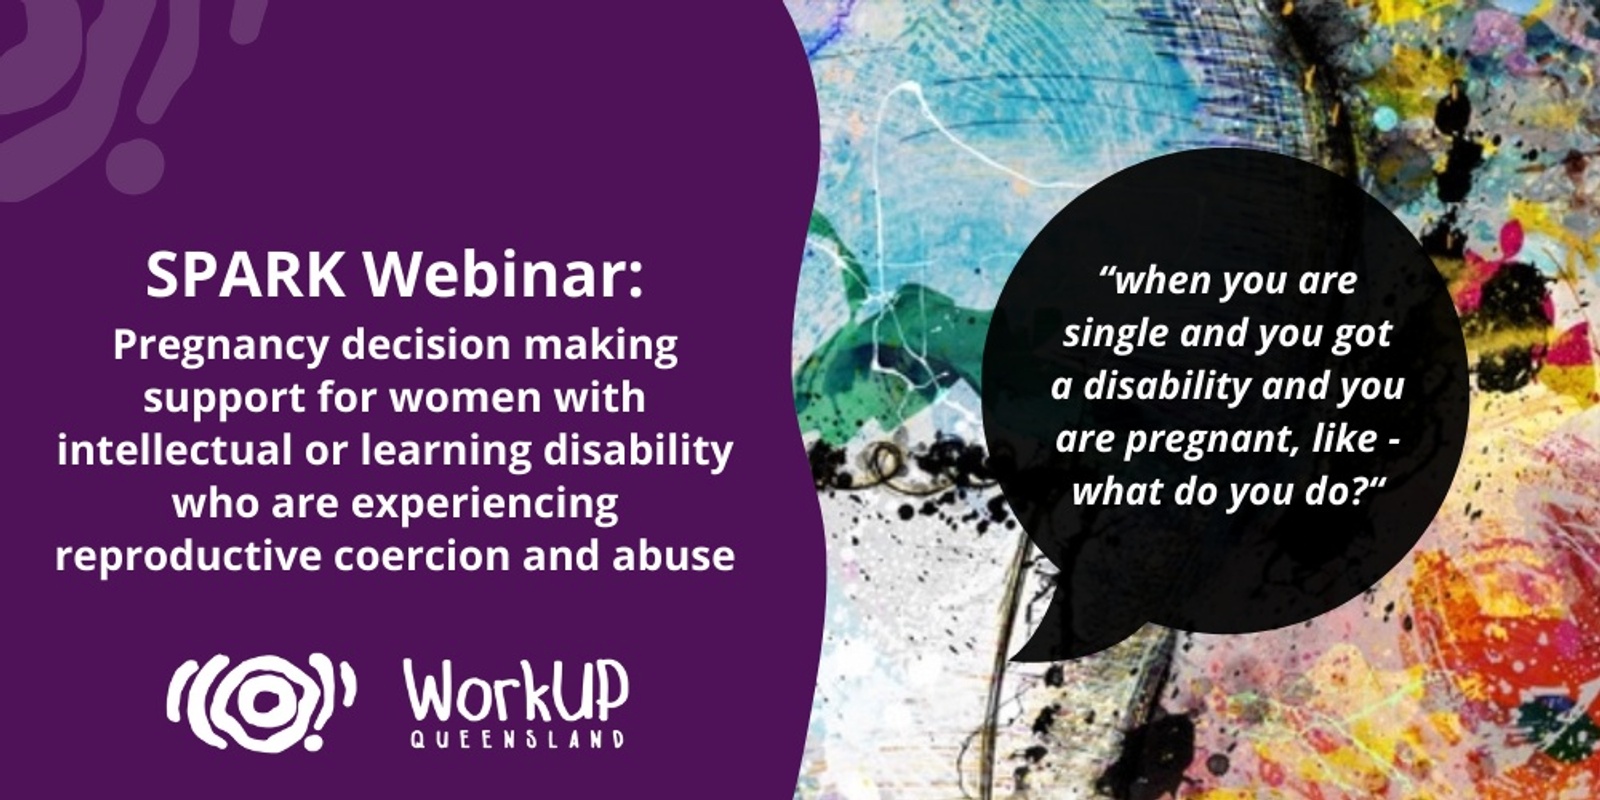 Banner image for SPARK Webinar - Pregnancy decision making support for women with intellectual or learning disability who are experiencing reproductive coercion and abuse